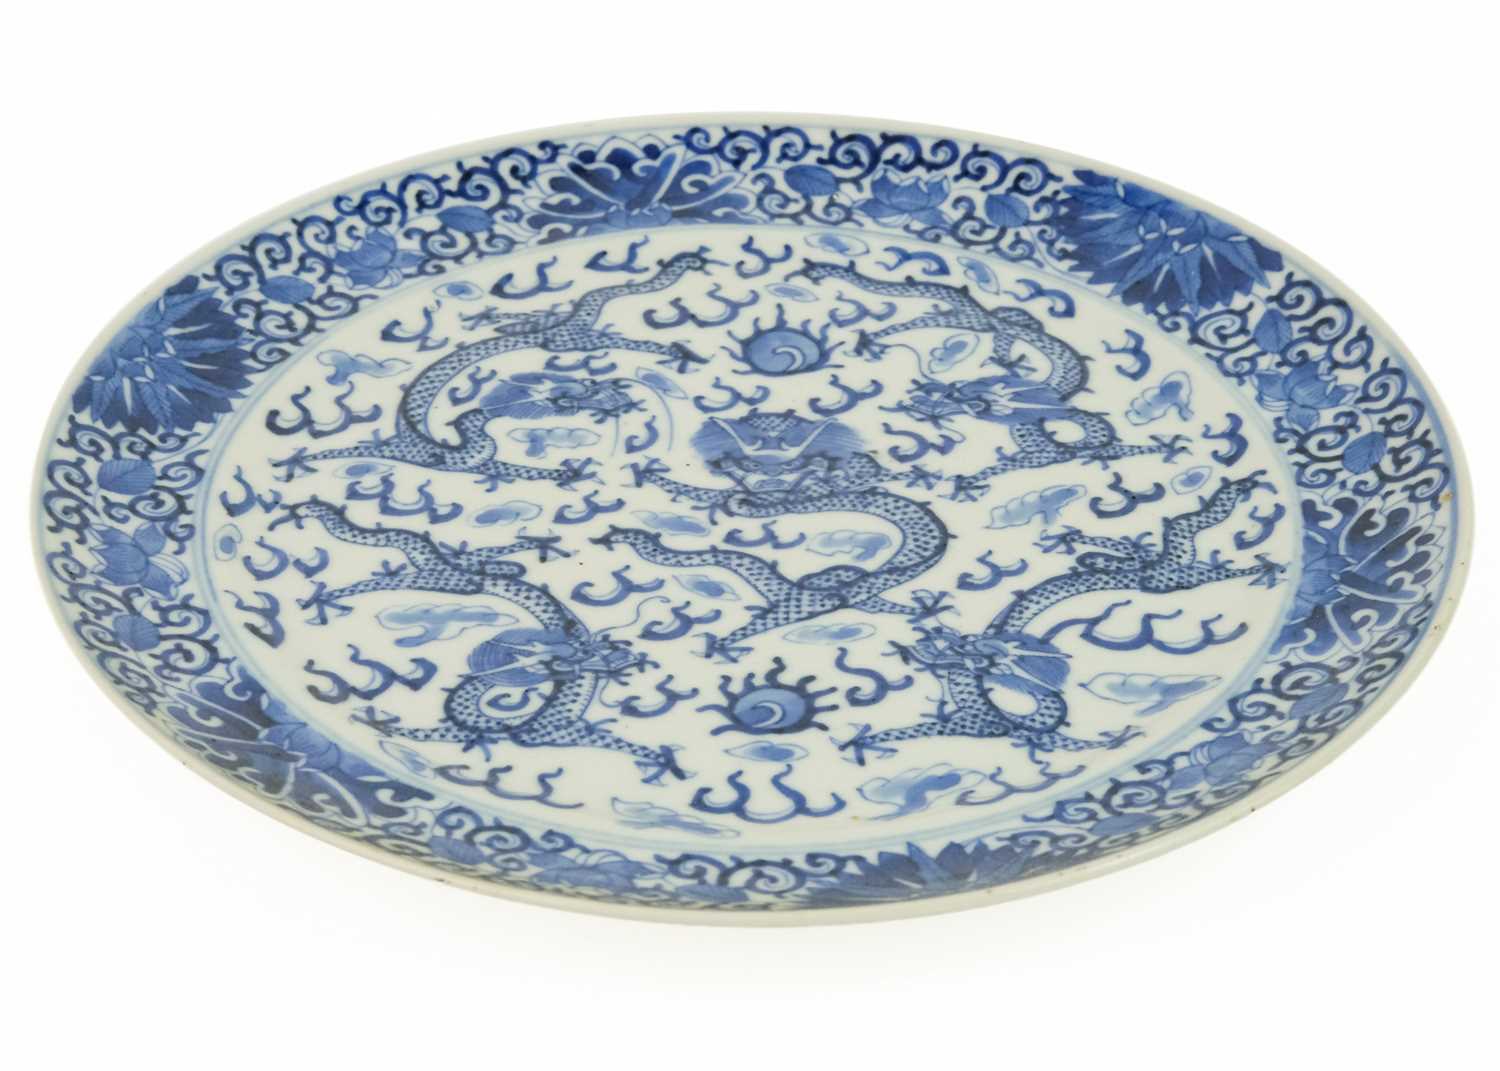 A Chinese blue and white porcelain plate, Qianlong period, 18th century. - Image 3 of 5